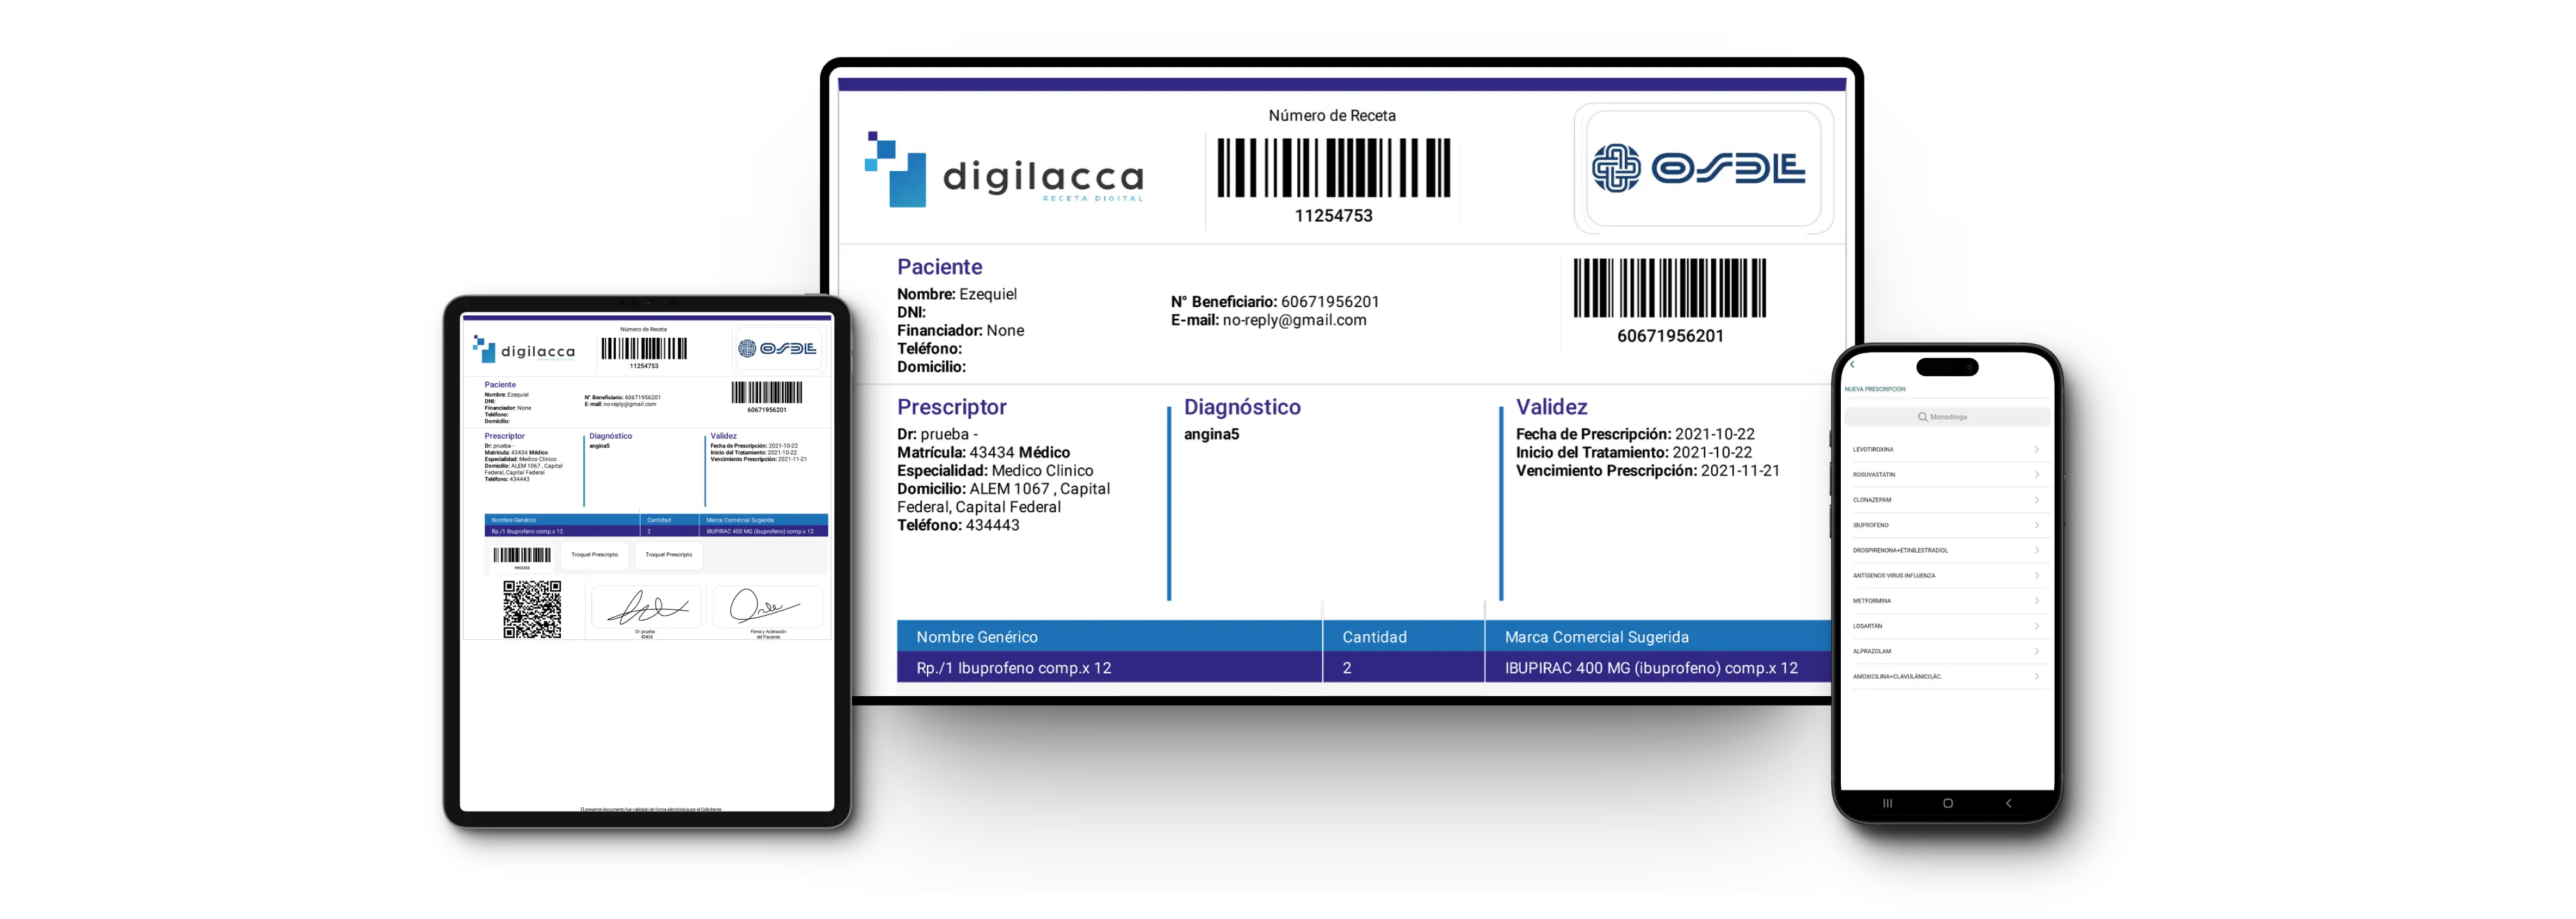 Digilacca app another example